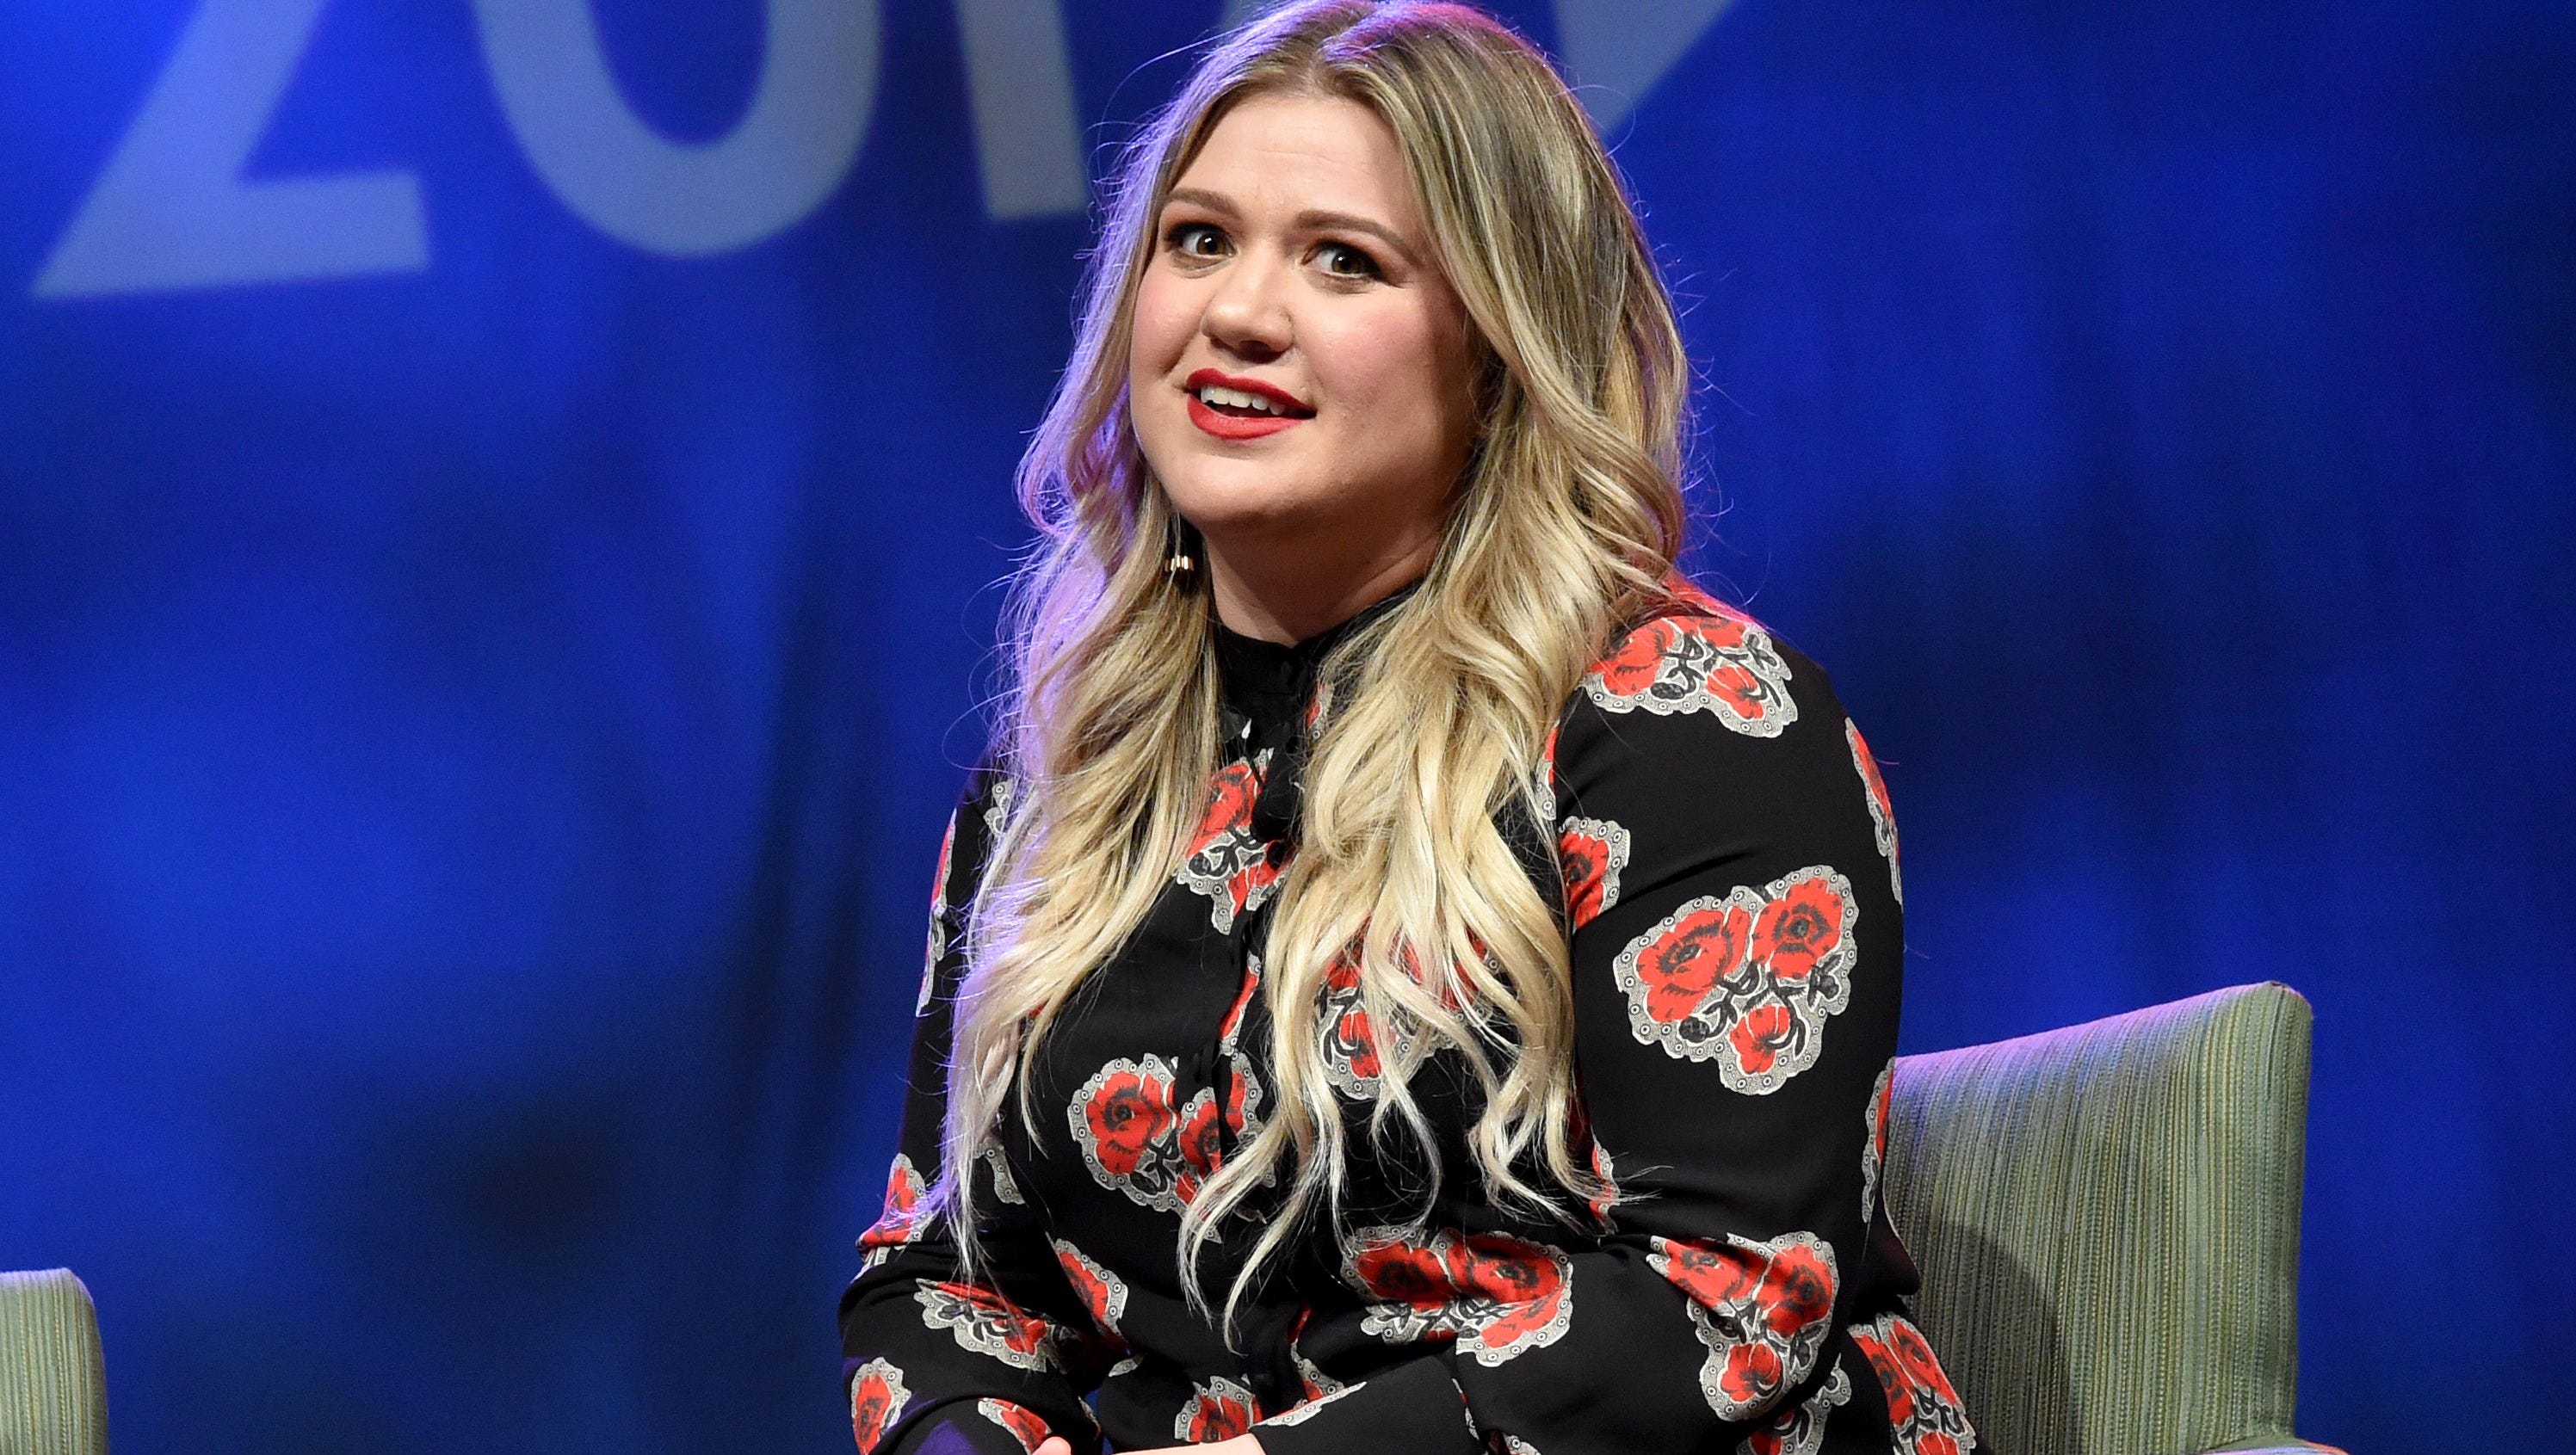 Kelly Clarkson Had The Perfect Response To This Trolls Body Shaming Tweet